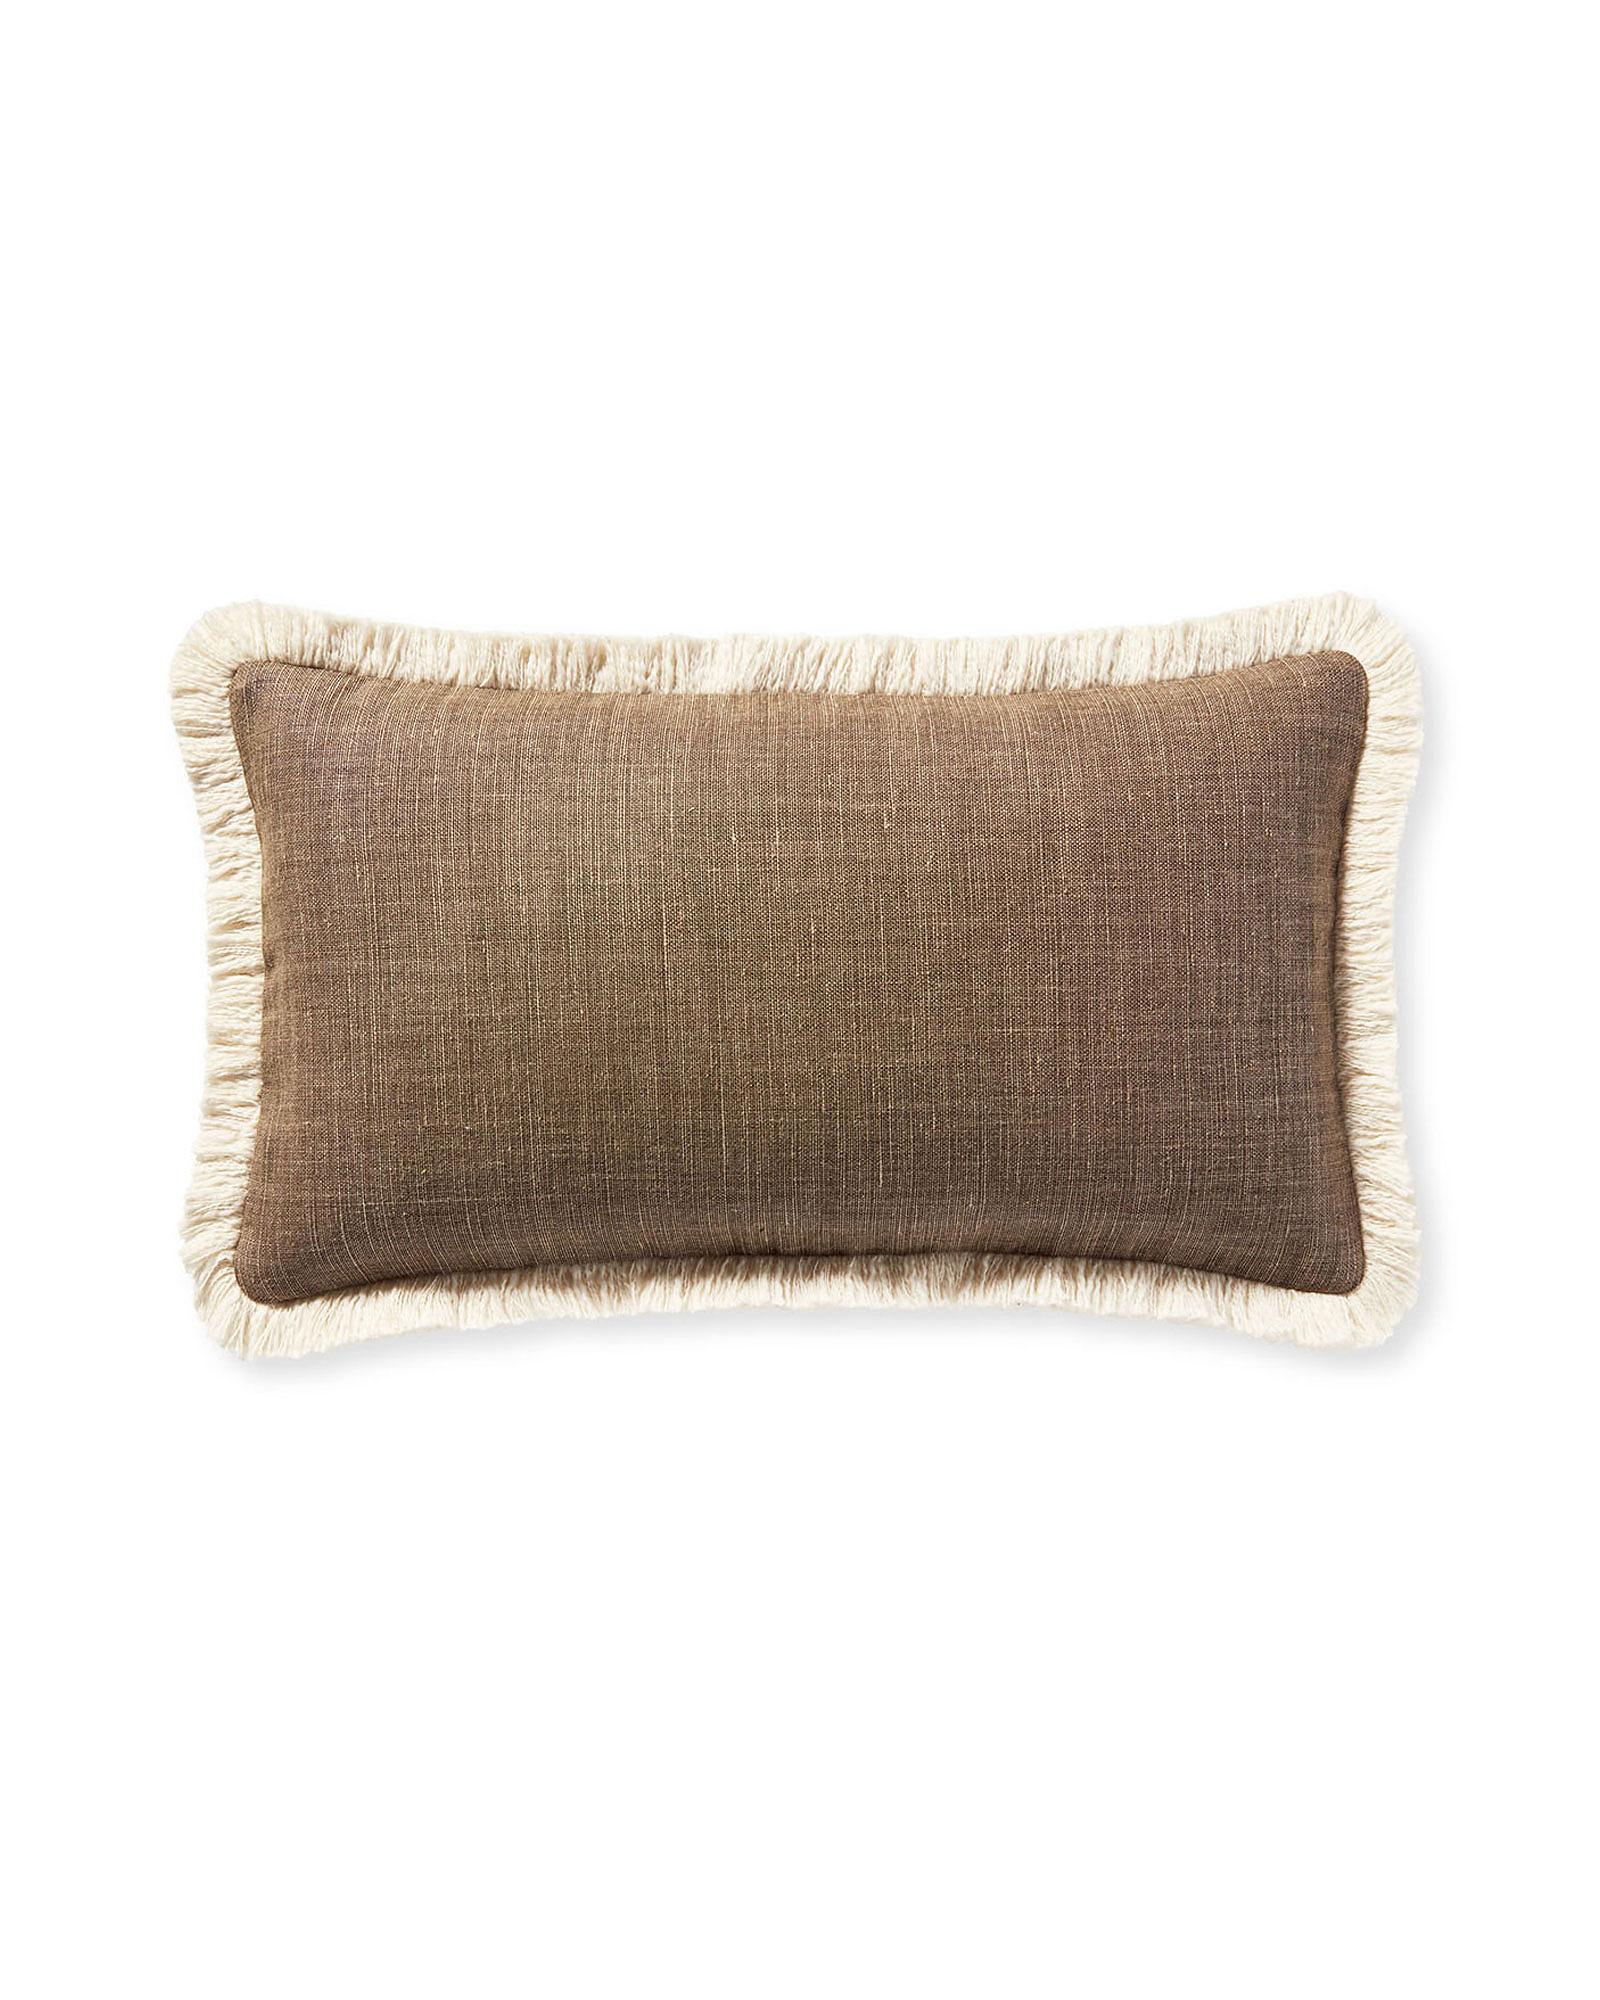 Shop Bowden Pillow Cover (SERENA & LILY), Size: 7”x36” Bolster, Color: White, Quantity: 1 from Serena & Lily on Openhaus